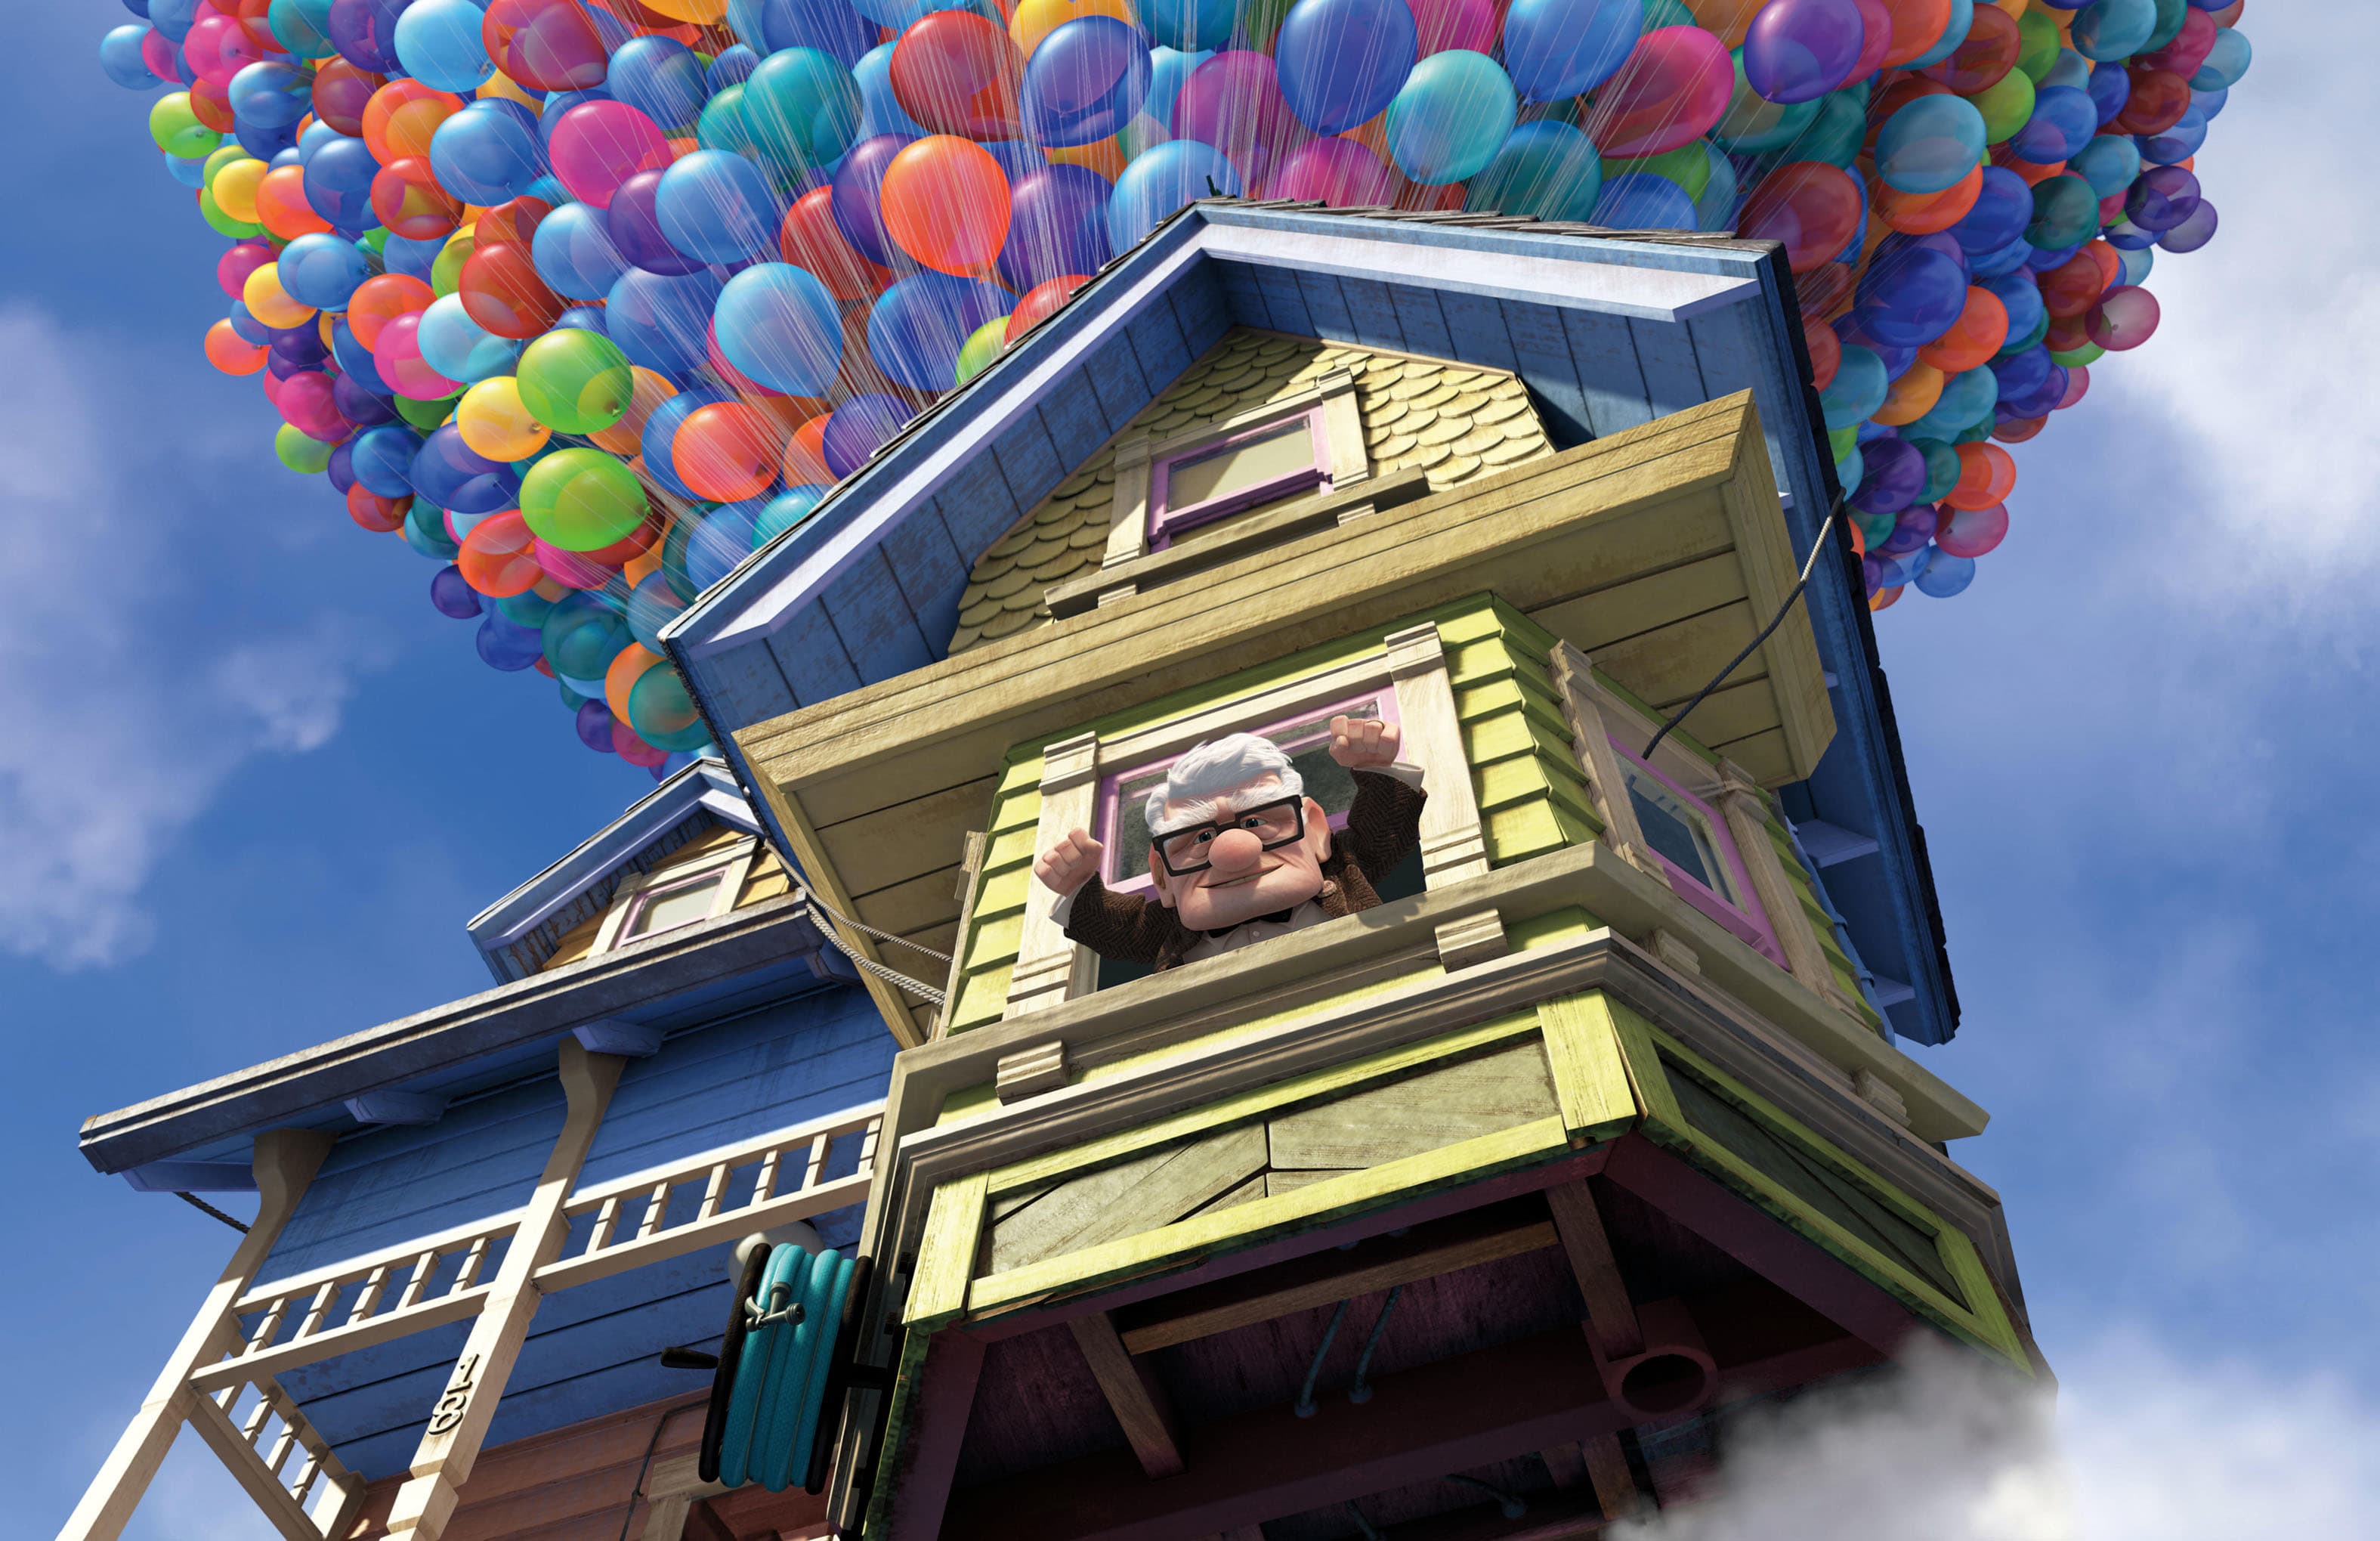 The House From Disney's “Up” Is Now The Most Adorable Little Cookie Jar